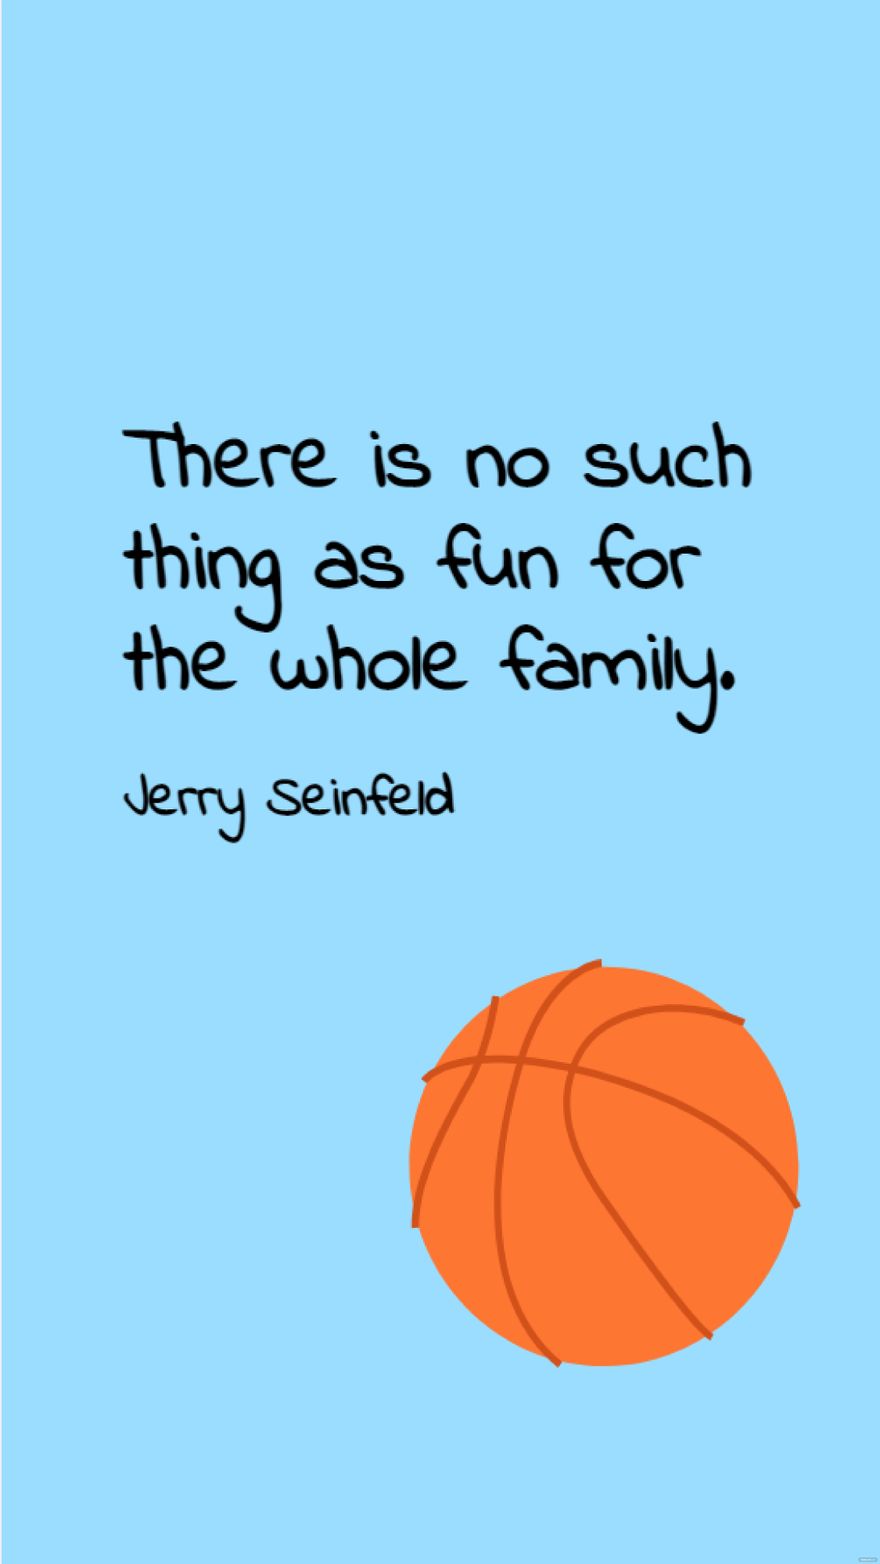 Jerry Seinfeld - There is no such thing as fun for the whole family.